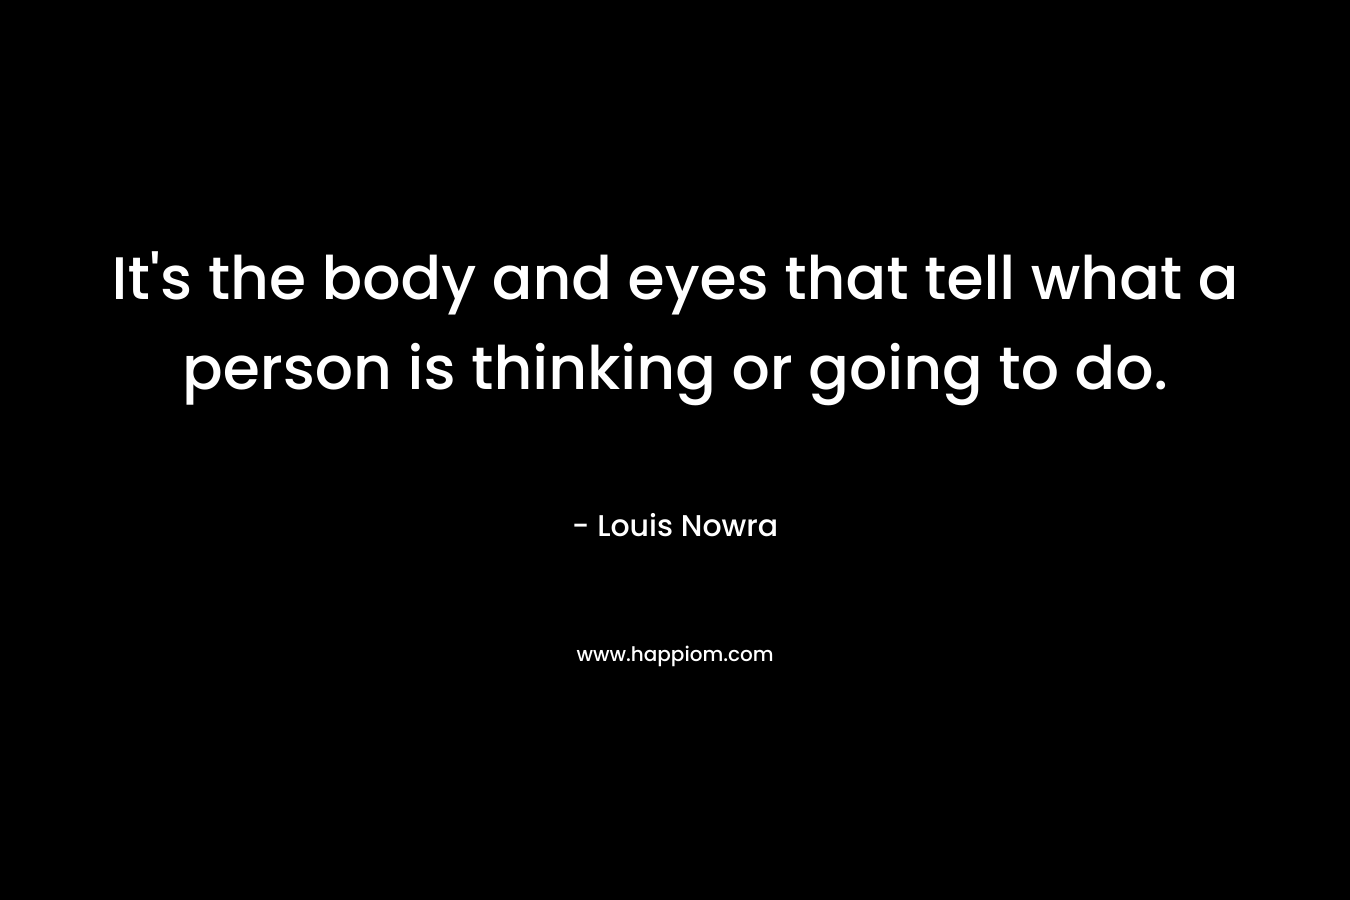 It's the body and eyes that tell what a person is thinking or going to do.